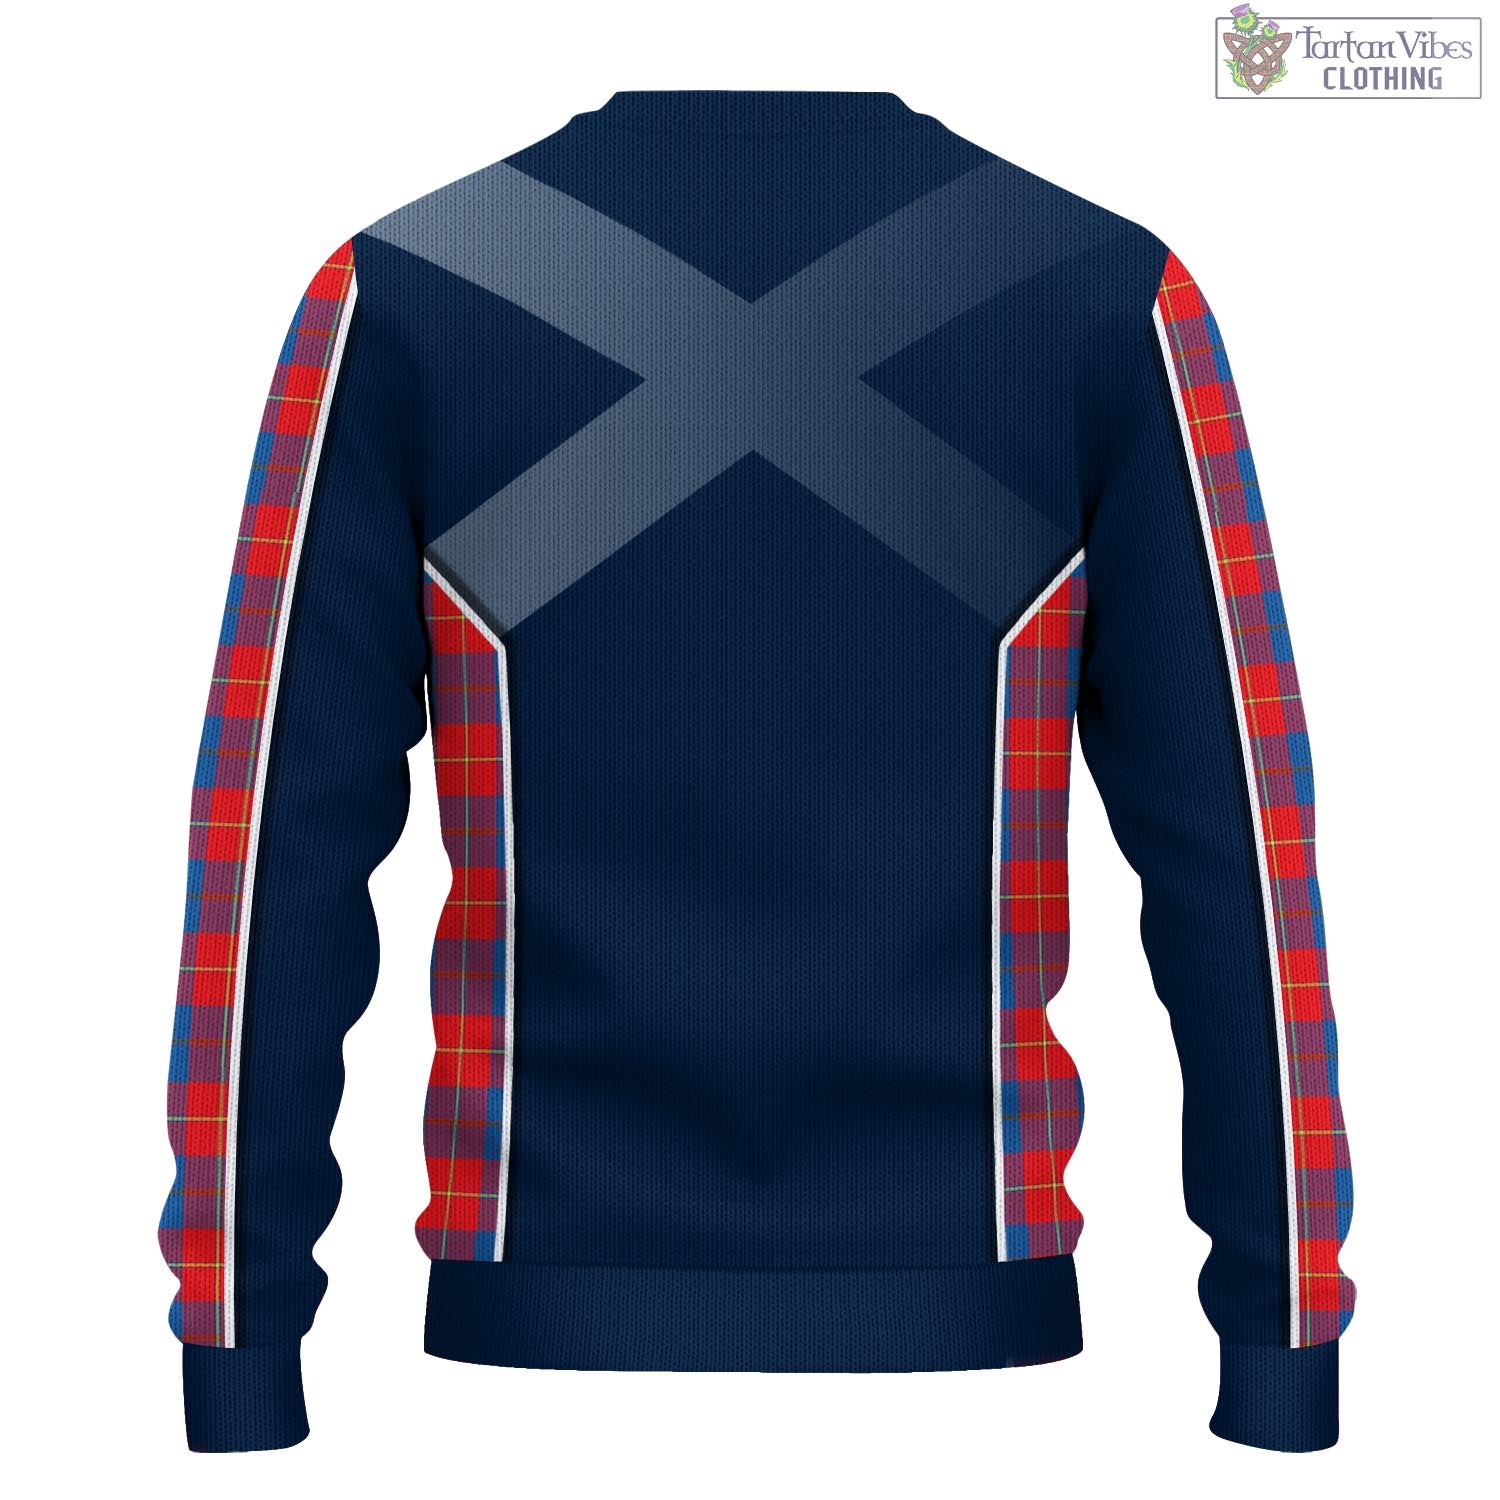 Tartan Vibes Clothing Galloway Red Tartan Knitted Sweatshirt with Family Crest and Scottish Thistle Vibes Sport Style